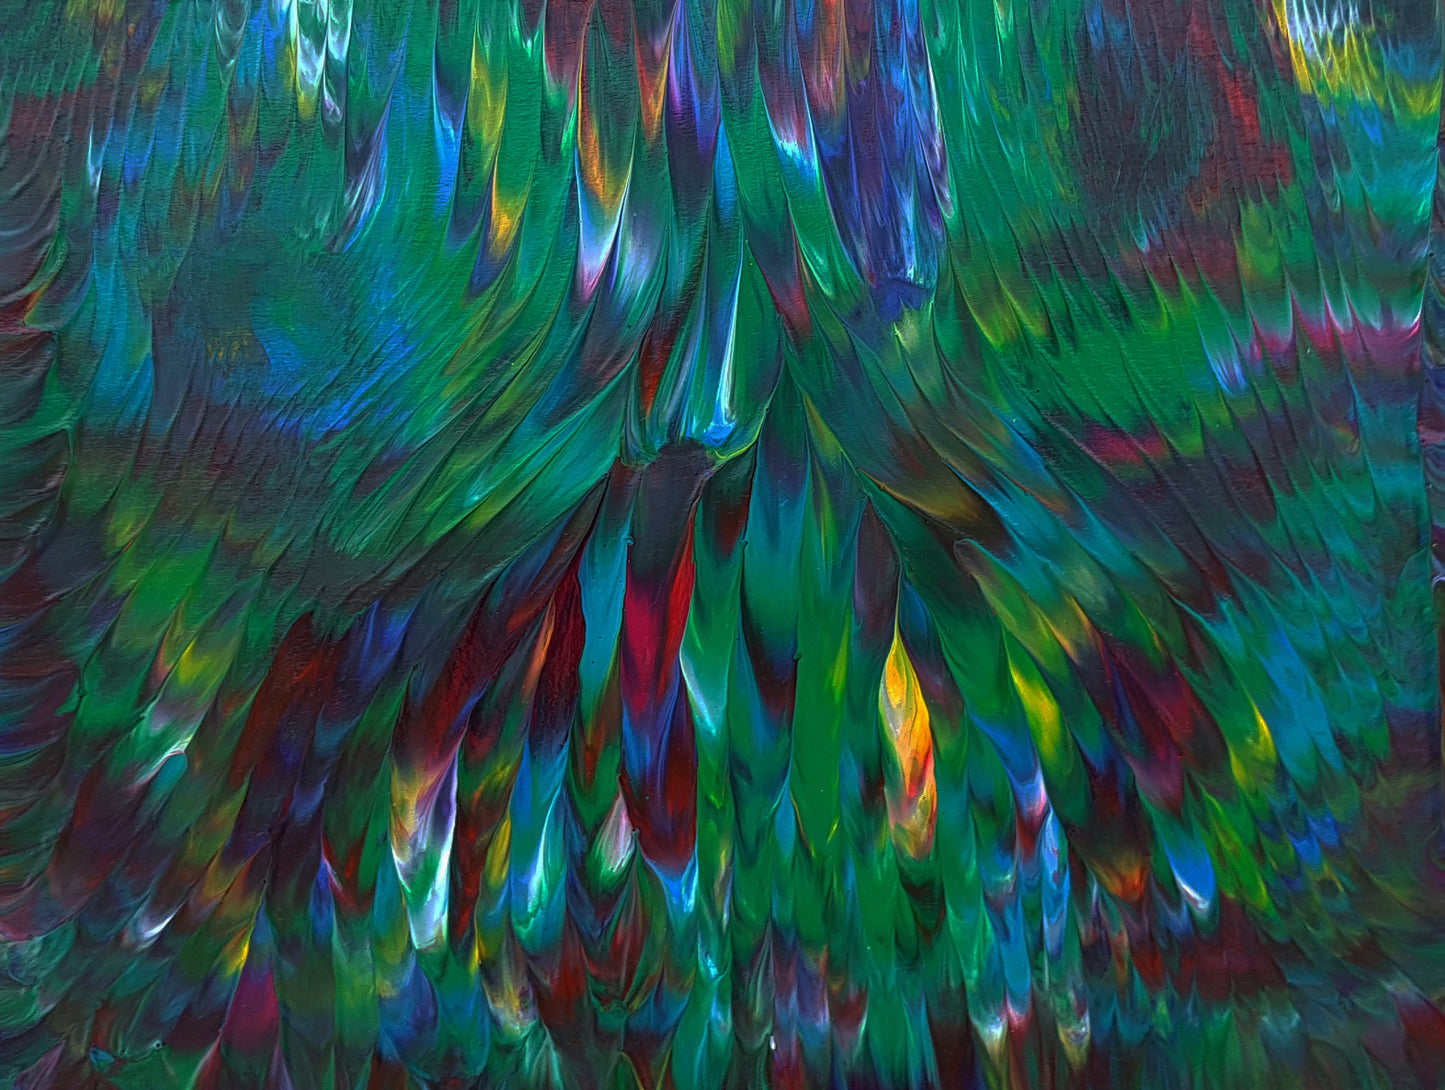 Emerald-Isle-Alexandra-Romano-Art-Gallery-Original-Abstract-Paintings-for-Sale-Emerald-Green-Painting-Blue-Magenta-Feathers